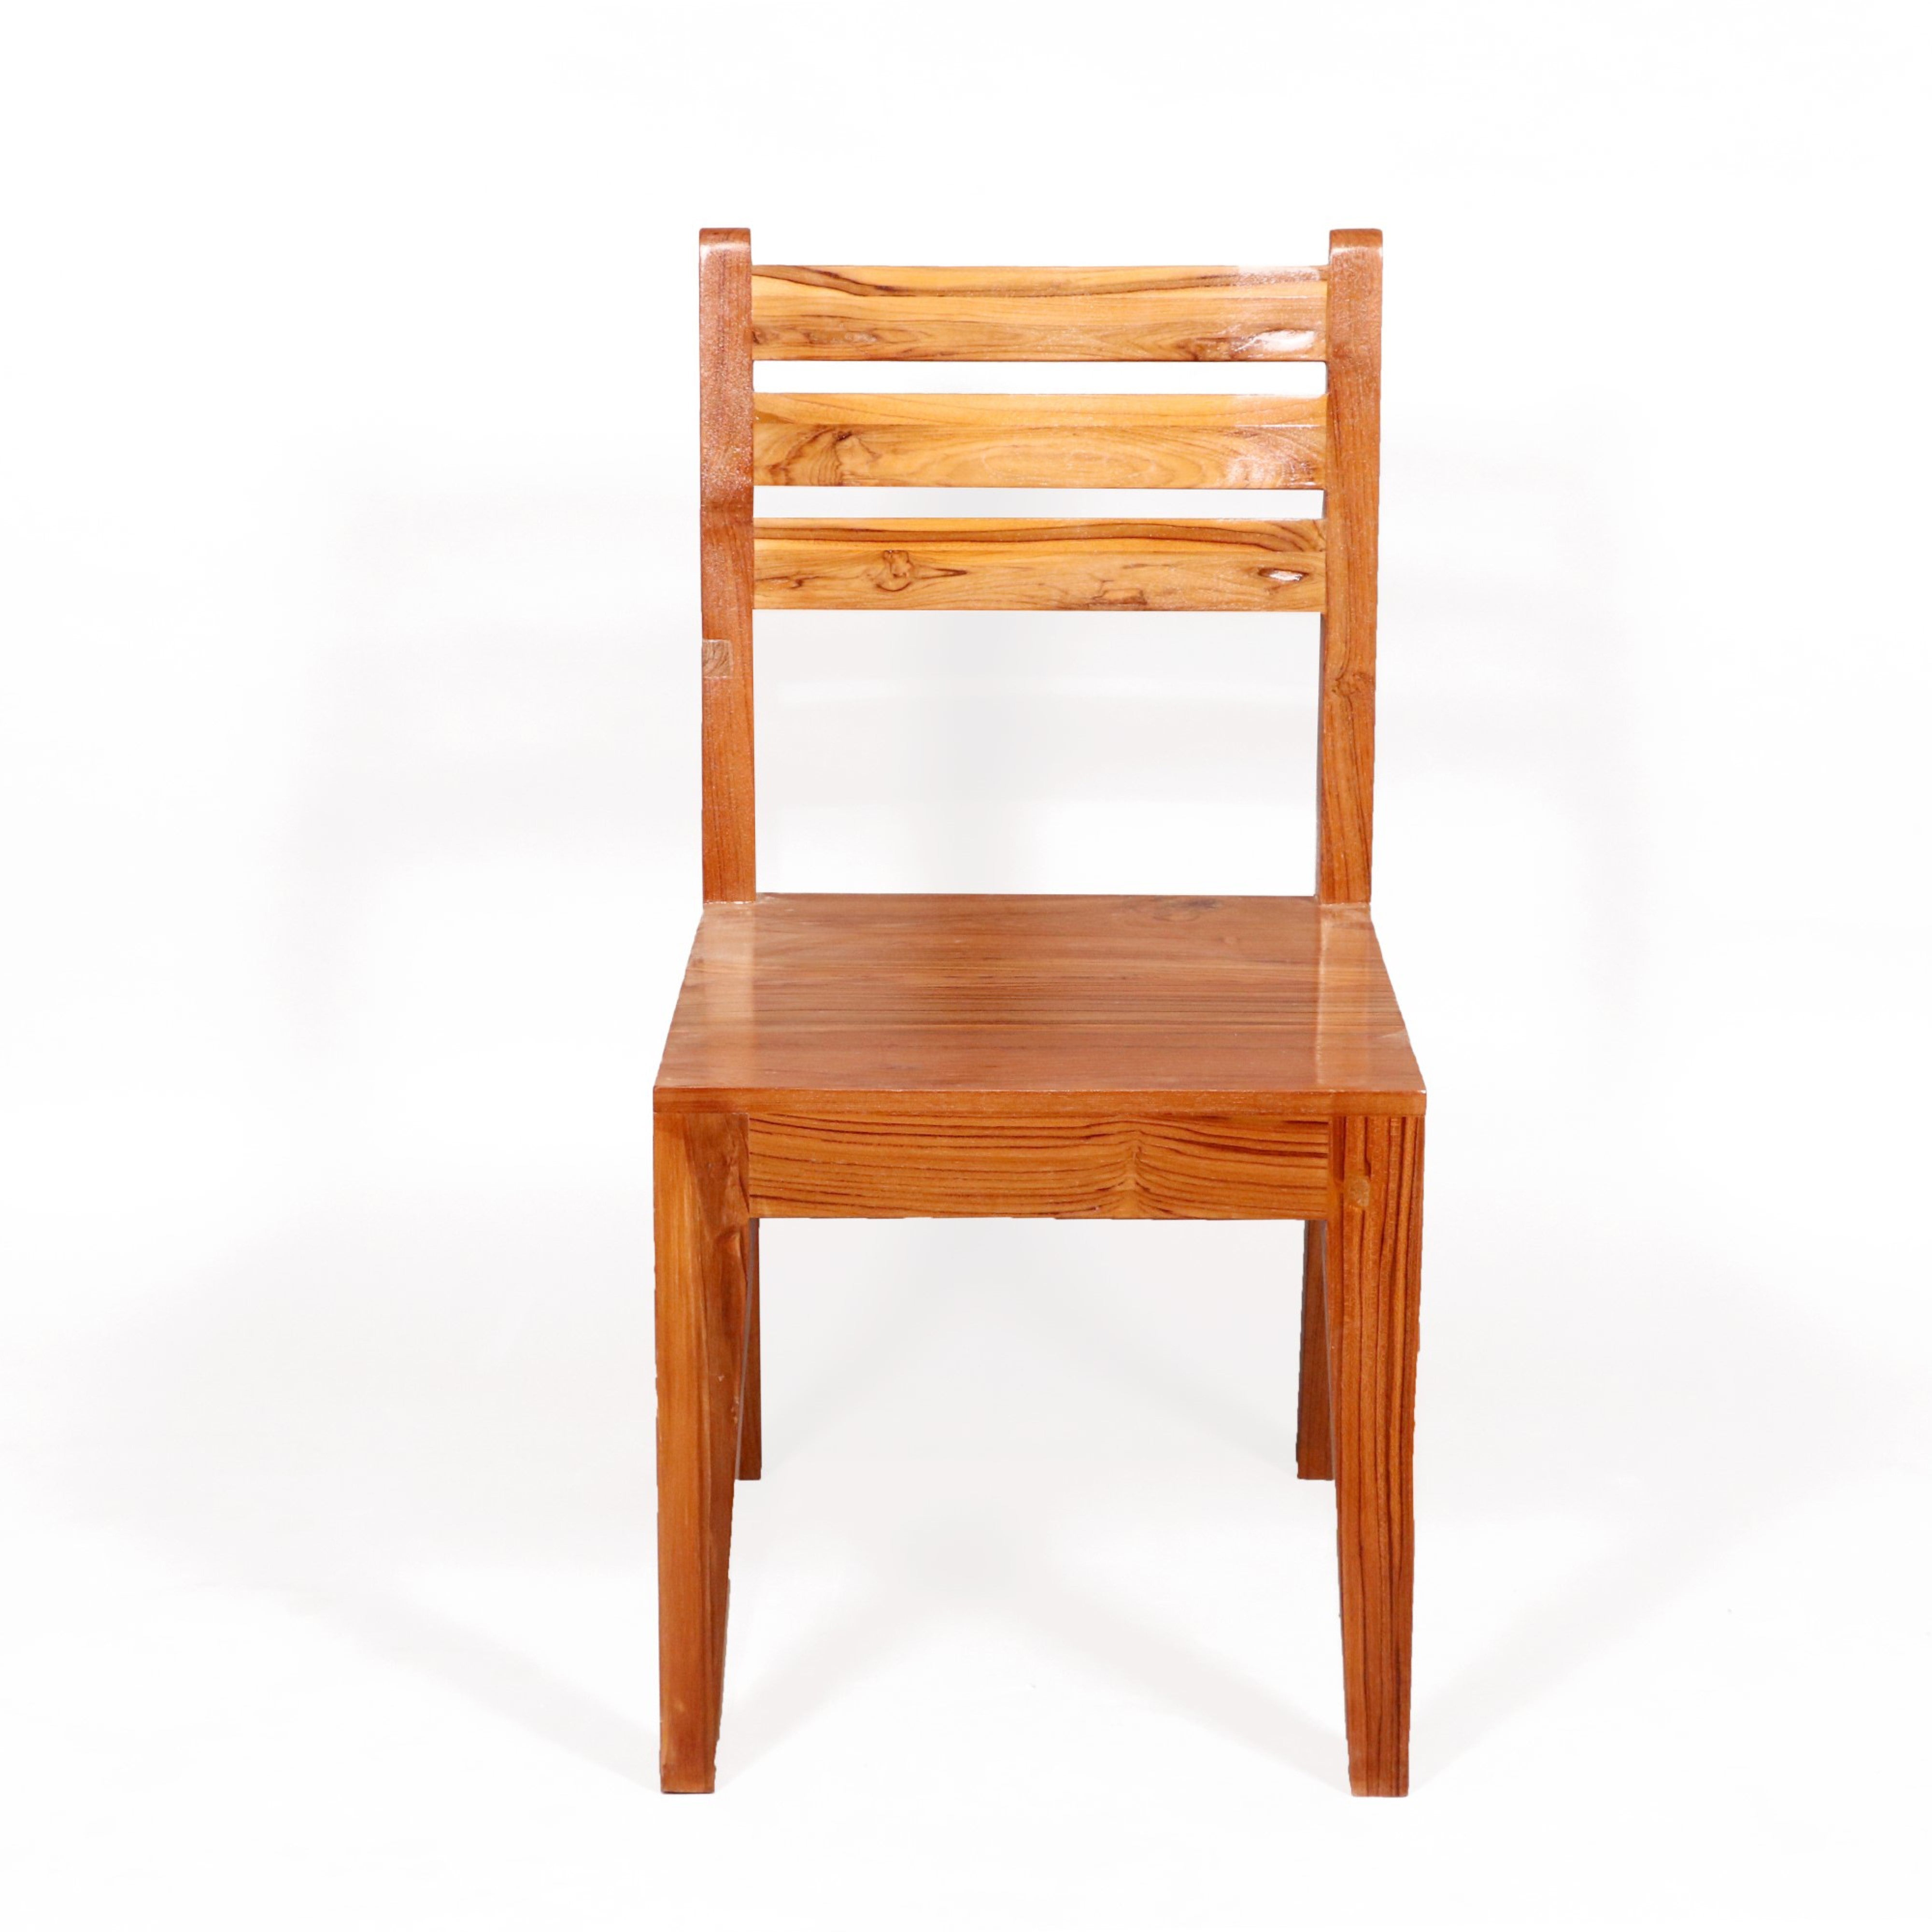 (Set of 2) Teak wood Light tone finish Dining Chair Dining Chair